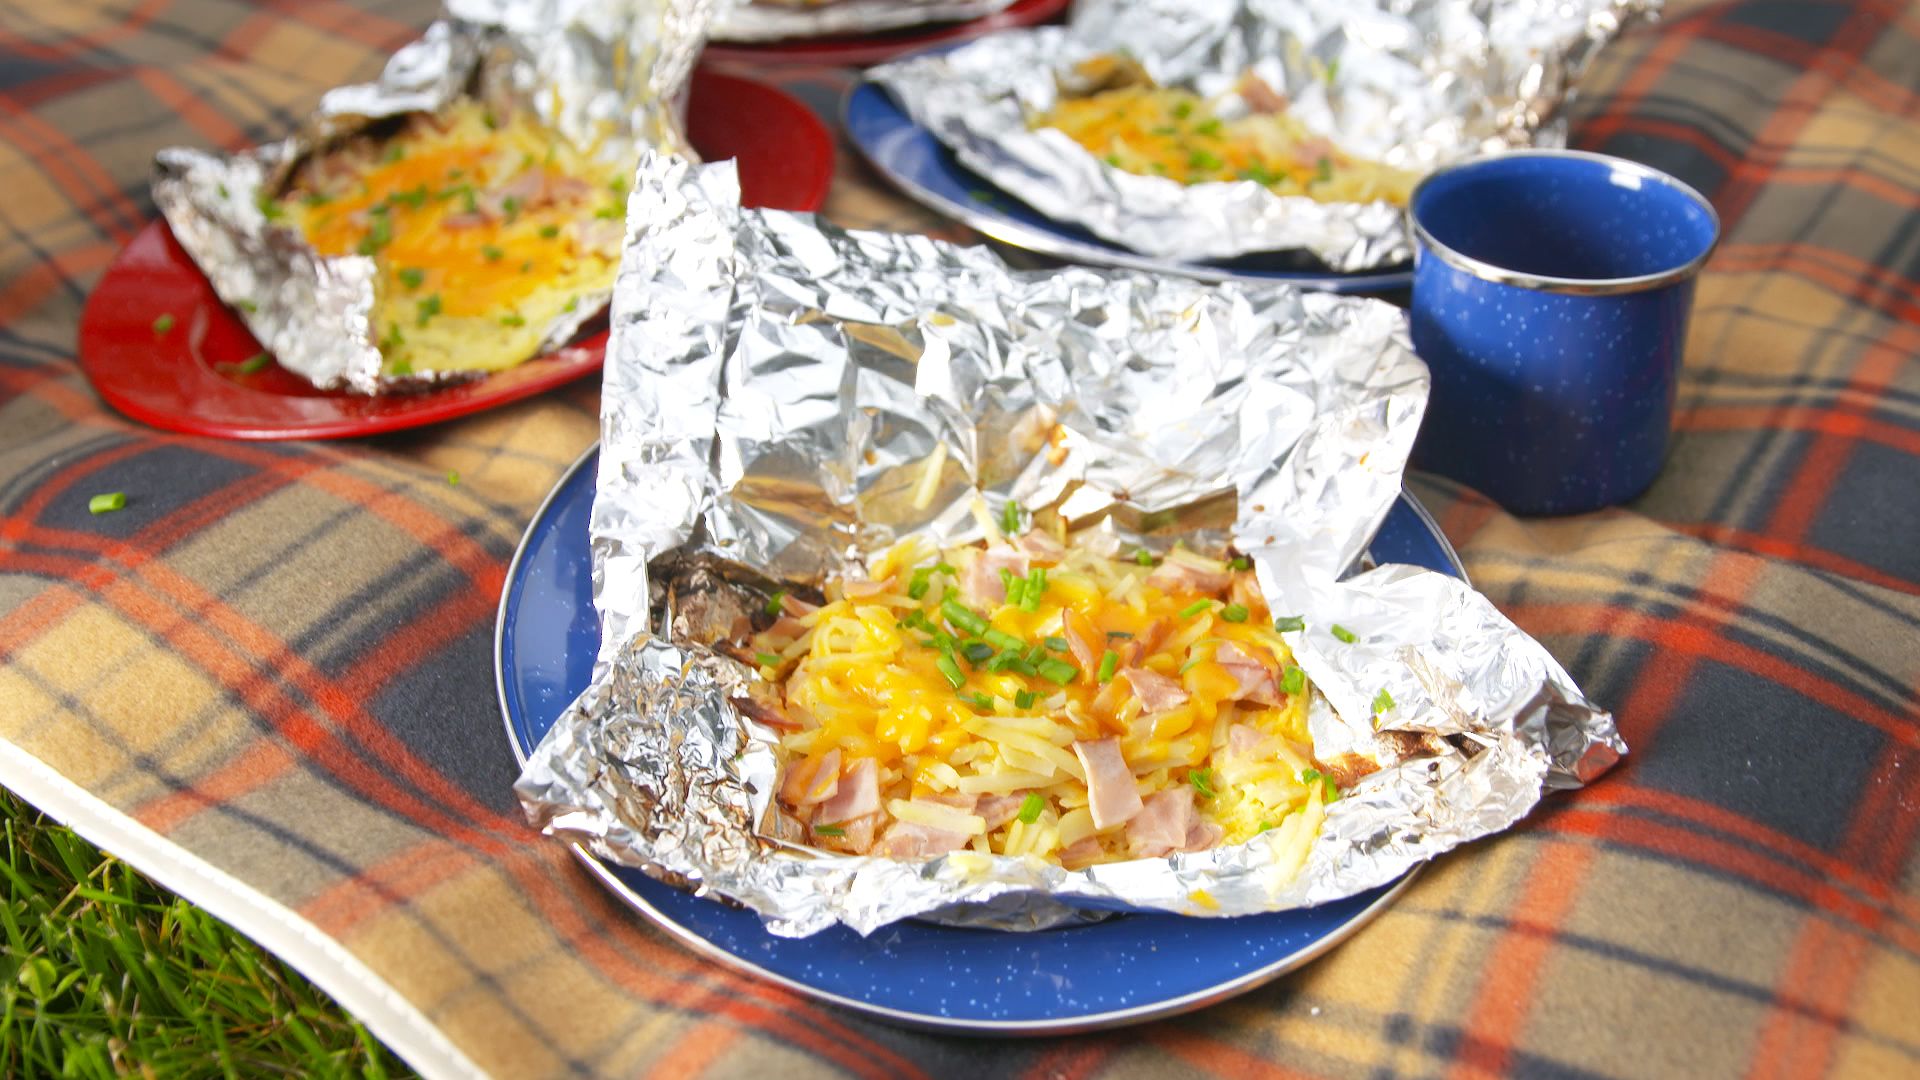 Is It Safe to Use Aluminum Foil in Cooking